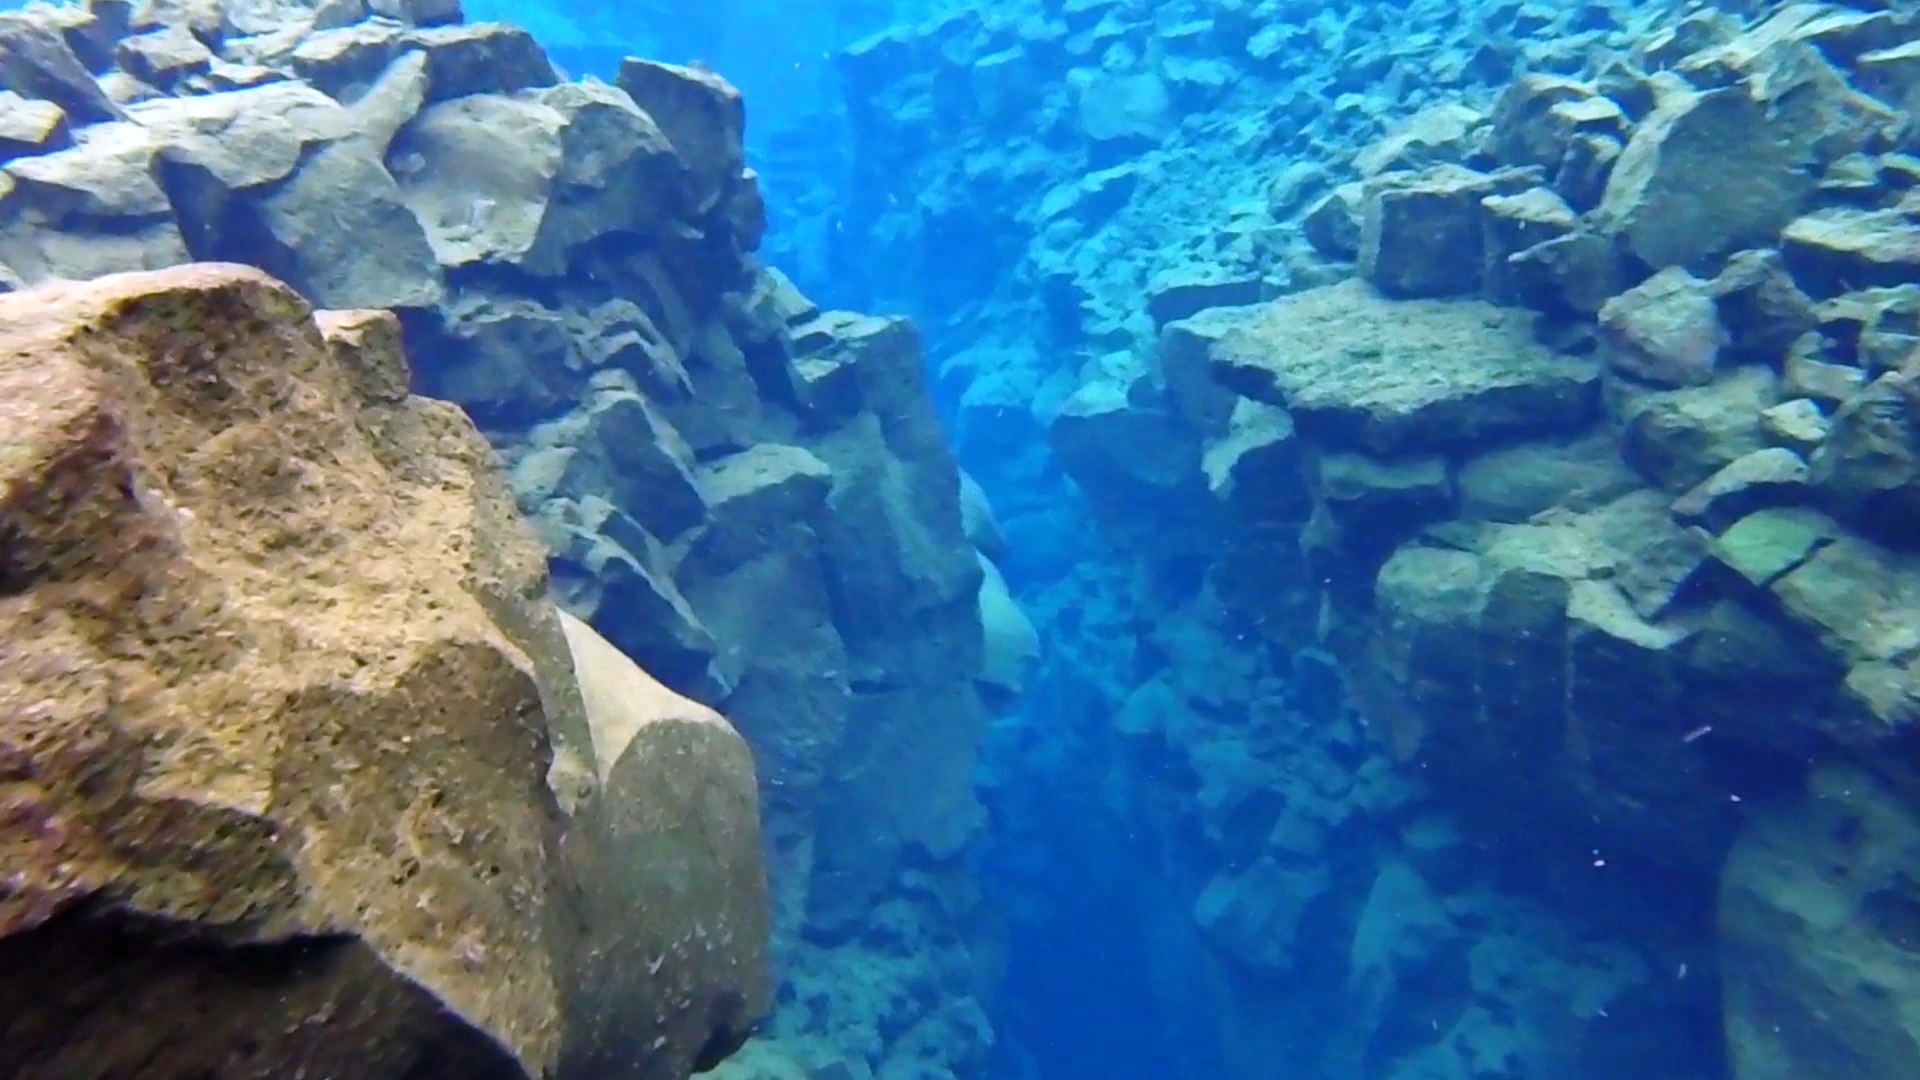 Into the Blue between tectonic plates